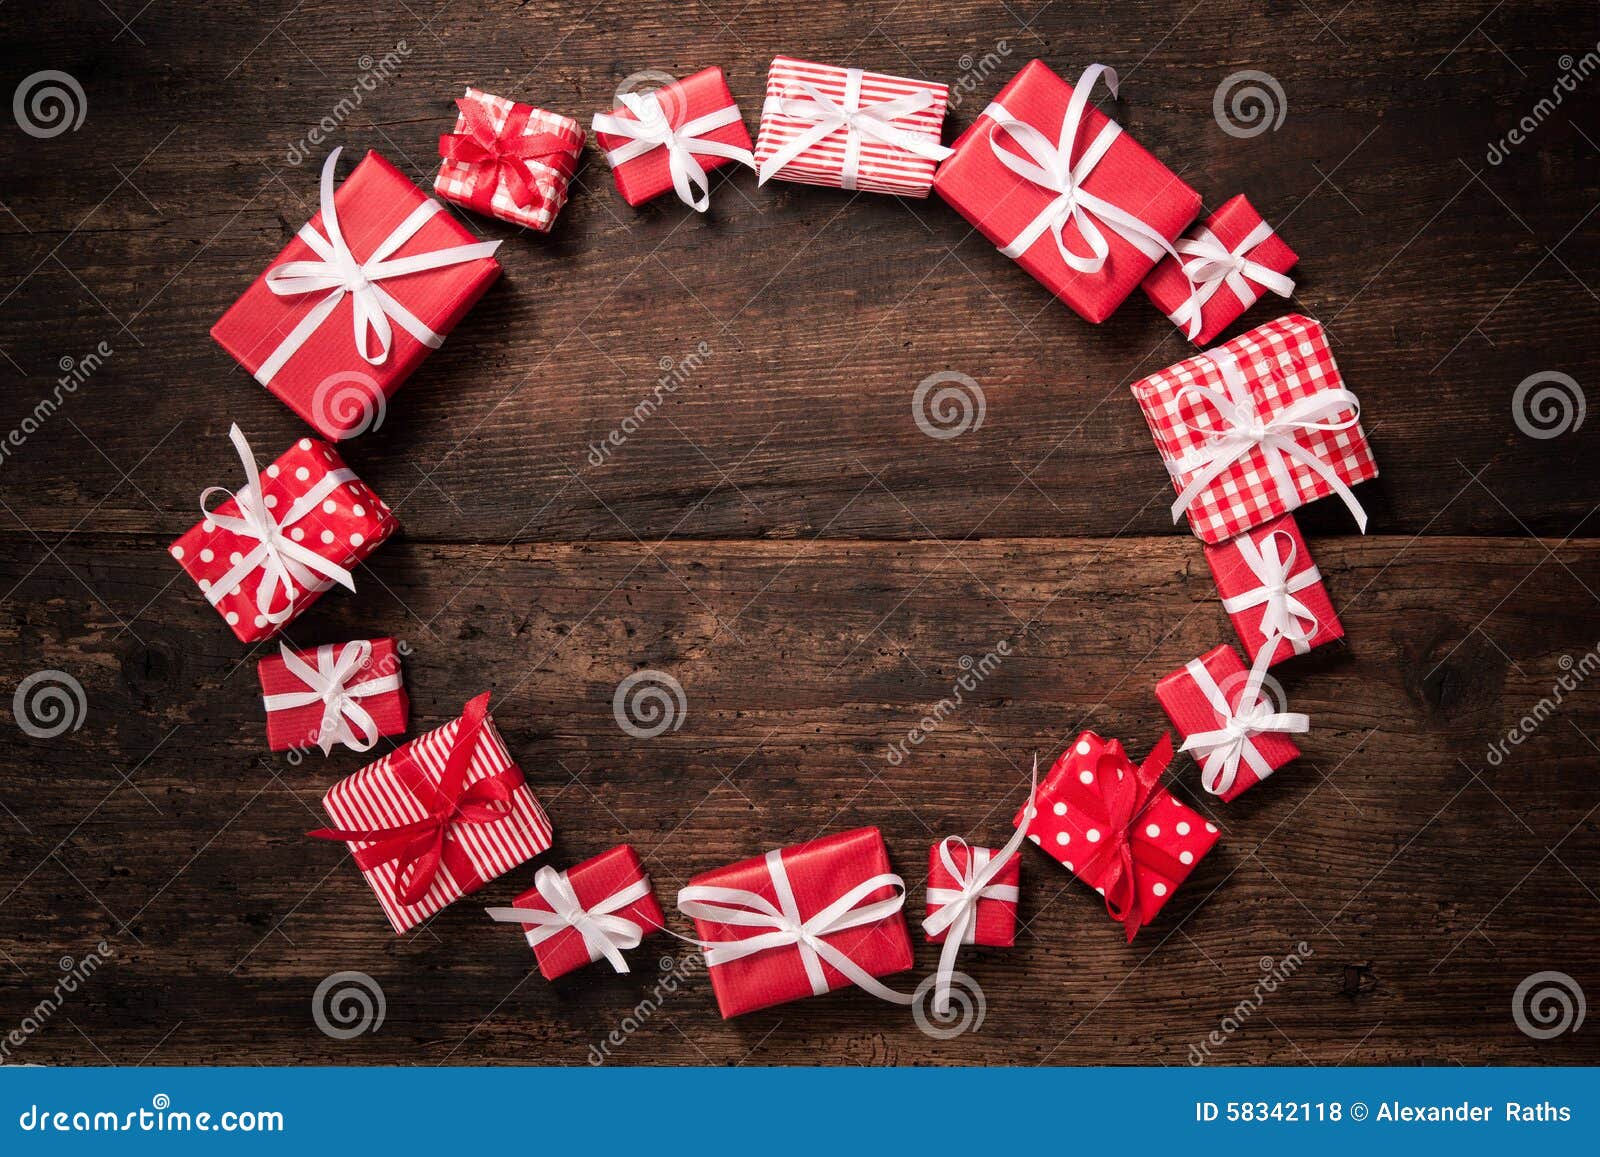 Frame from gift boxes stock photo. Image of frame, heart - 58342118